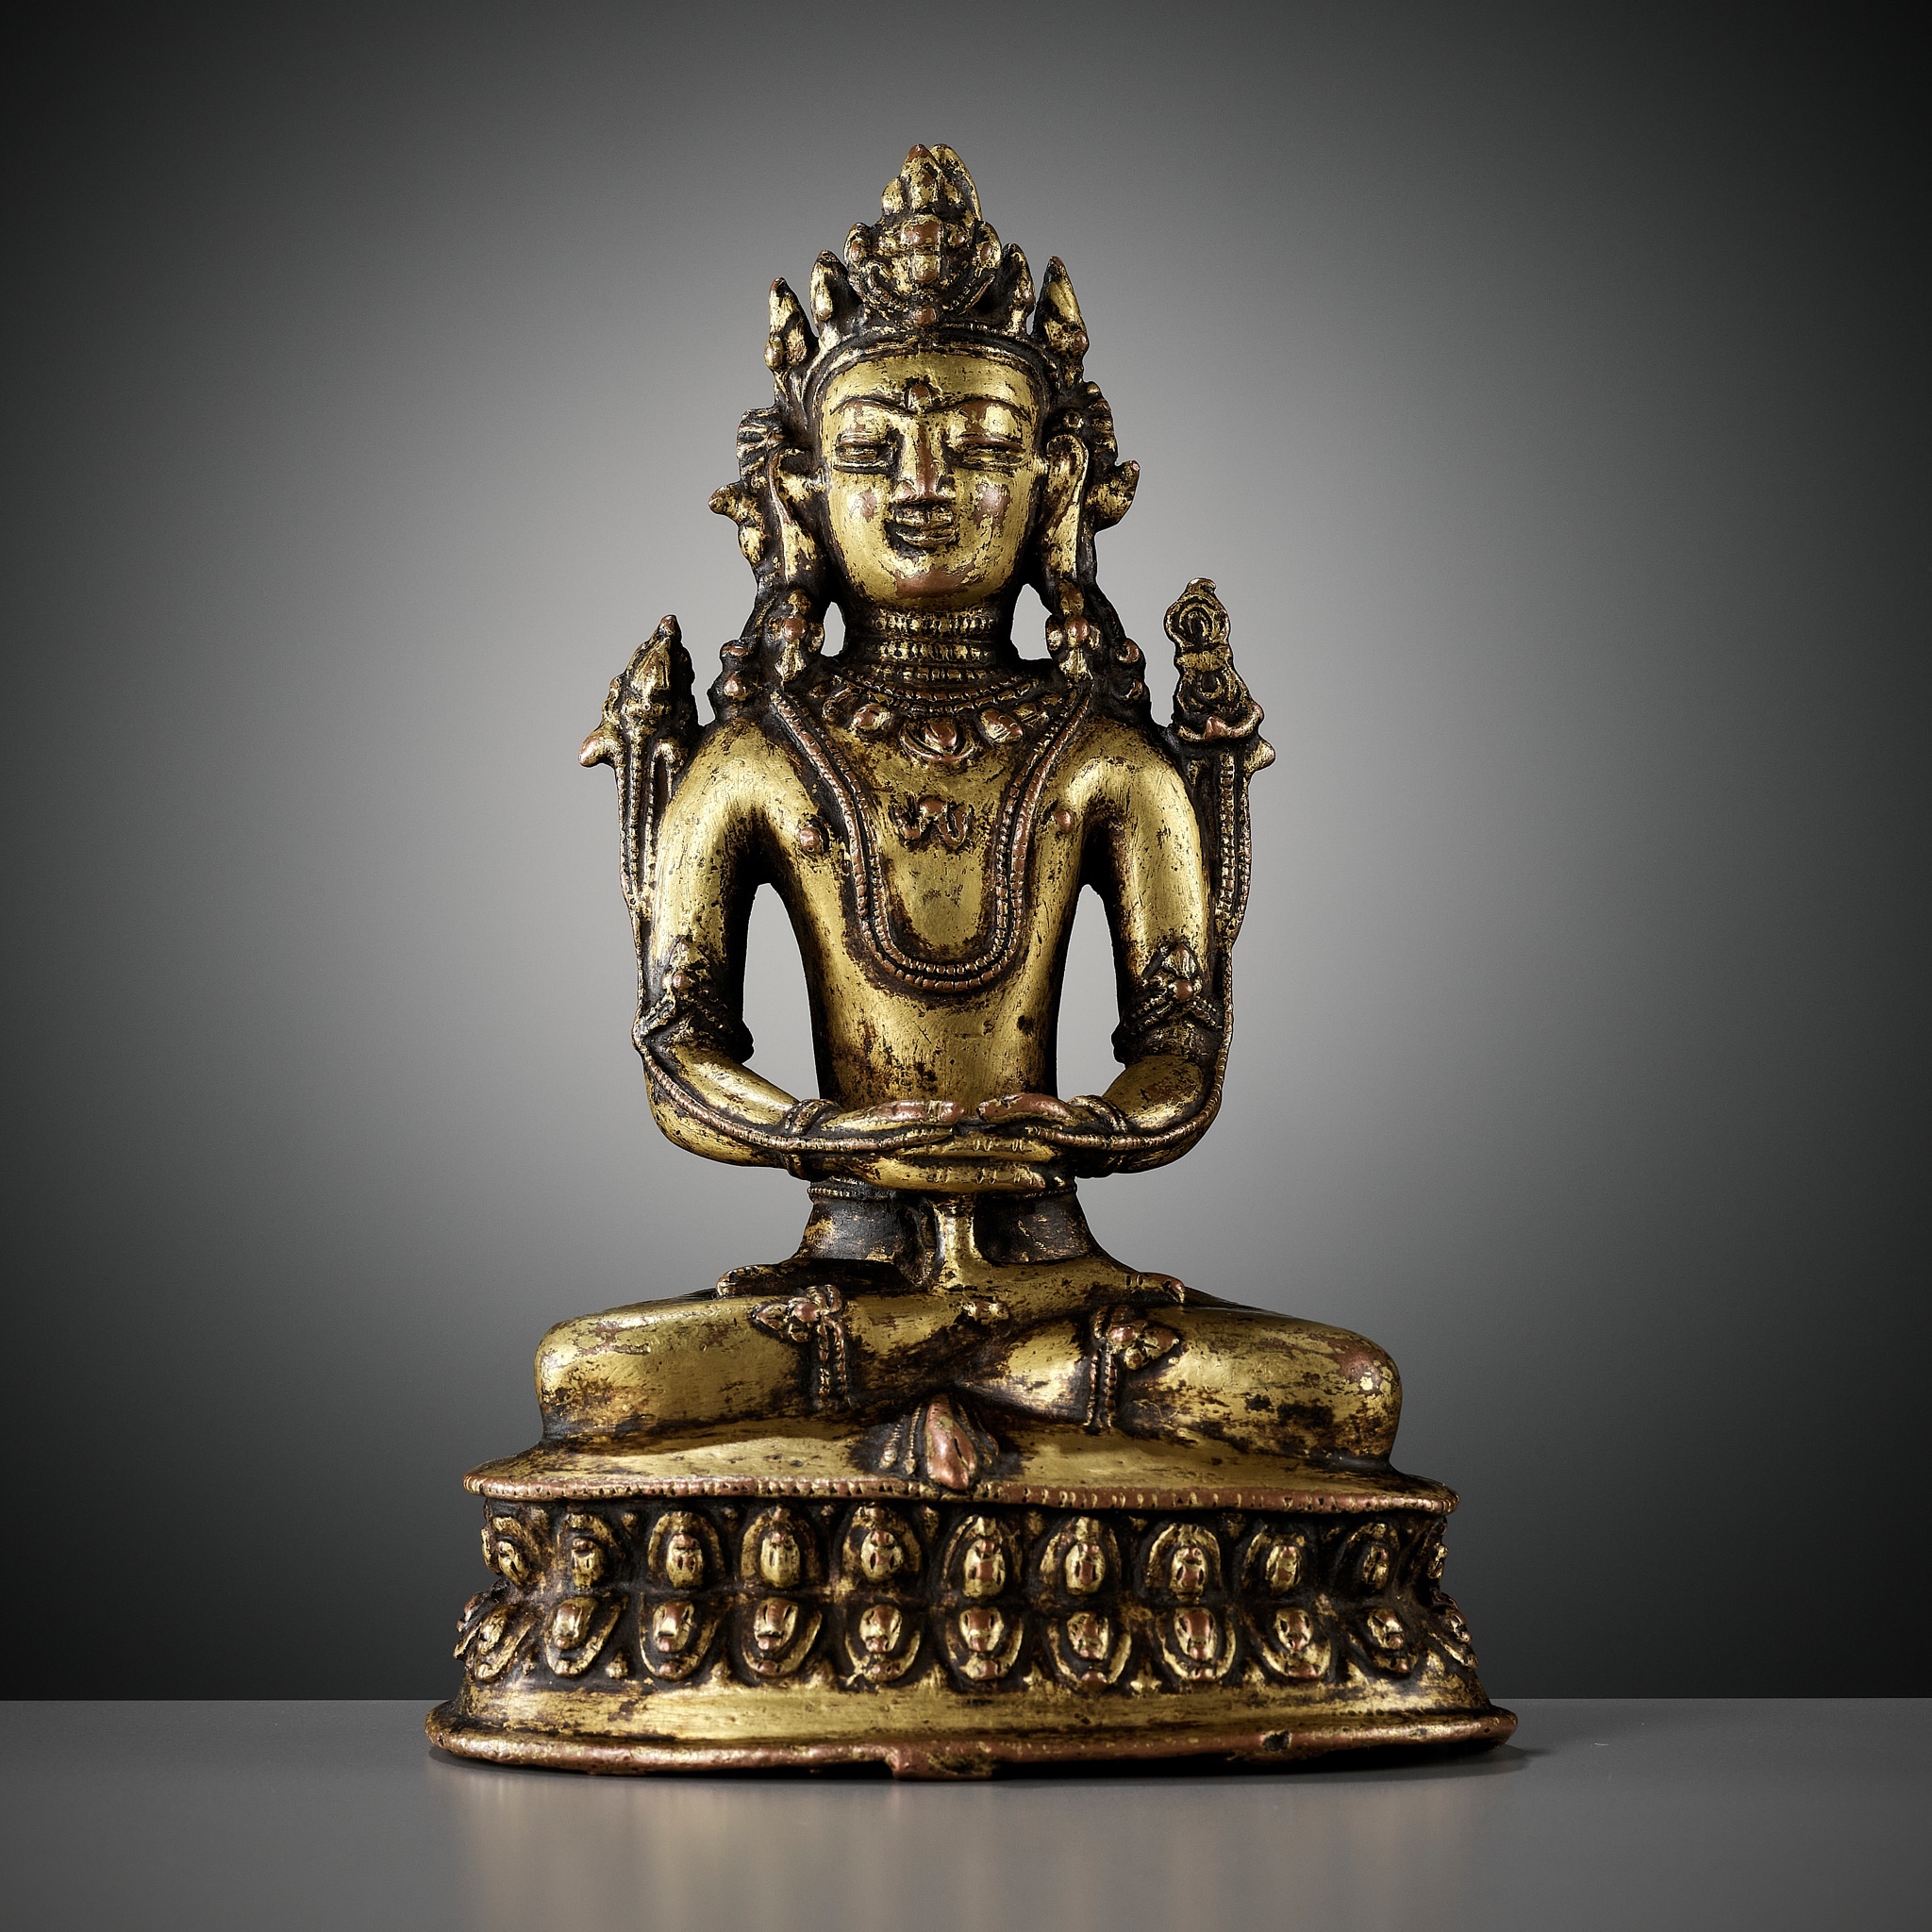 A GILT COPPER-ALLOY FIGURE OF KUNZANG AKOR, BON TRADITION, TIBET, 14TH-15TH CENTURY - Image 13 of 13